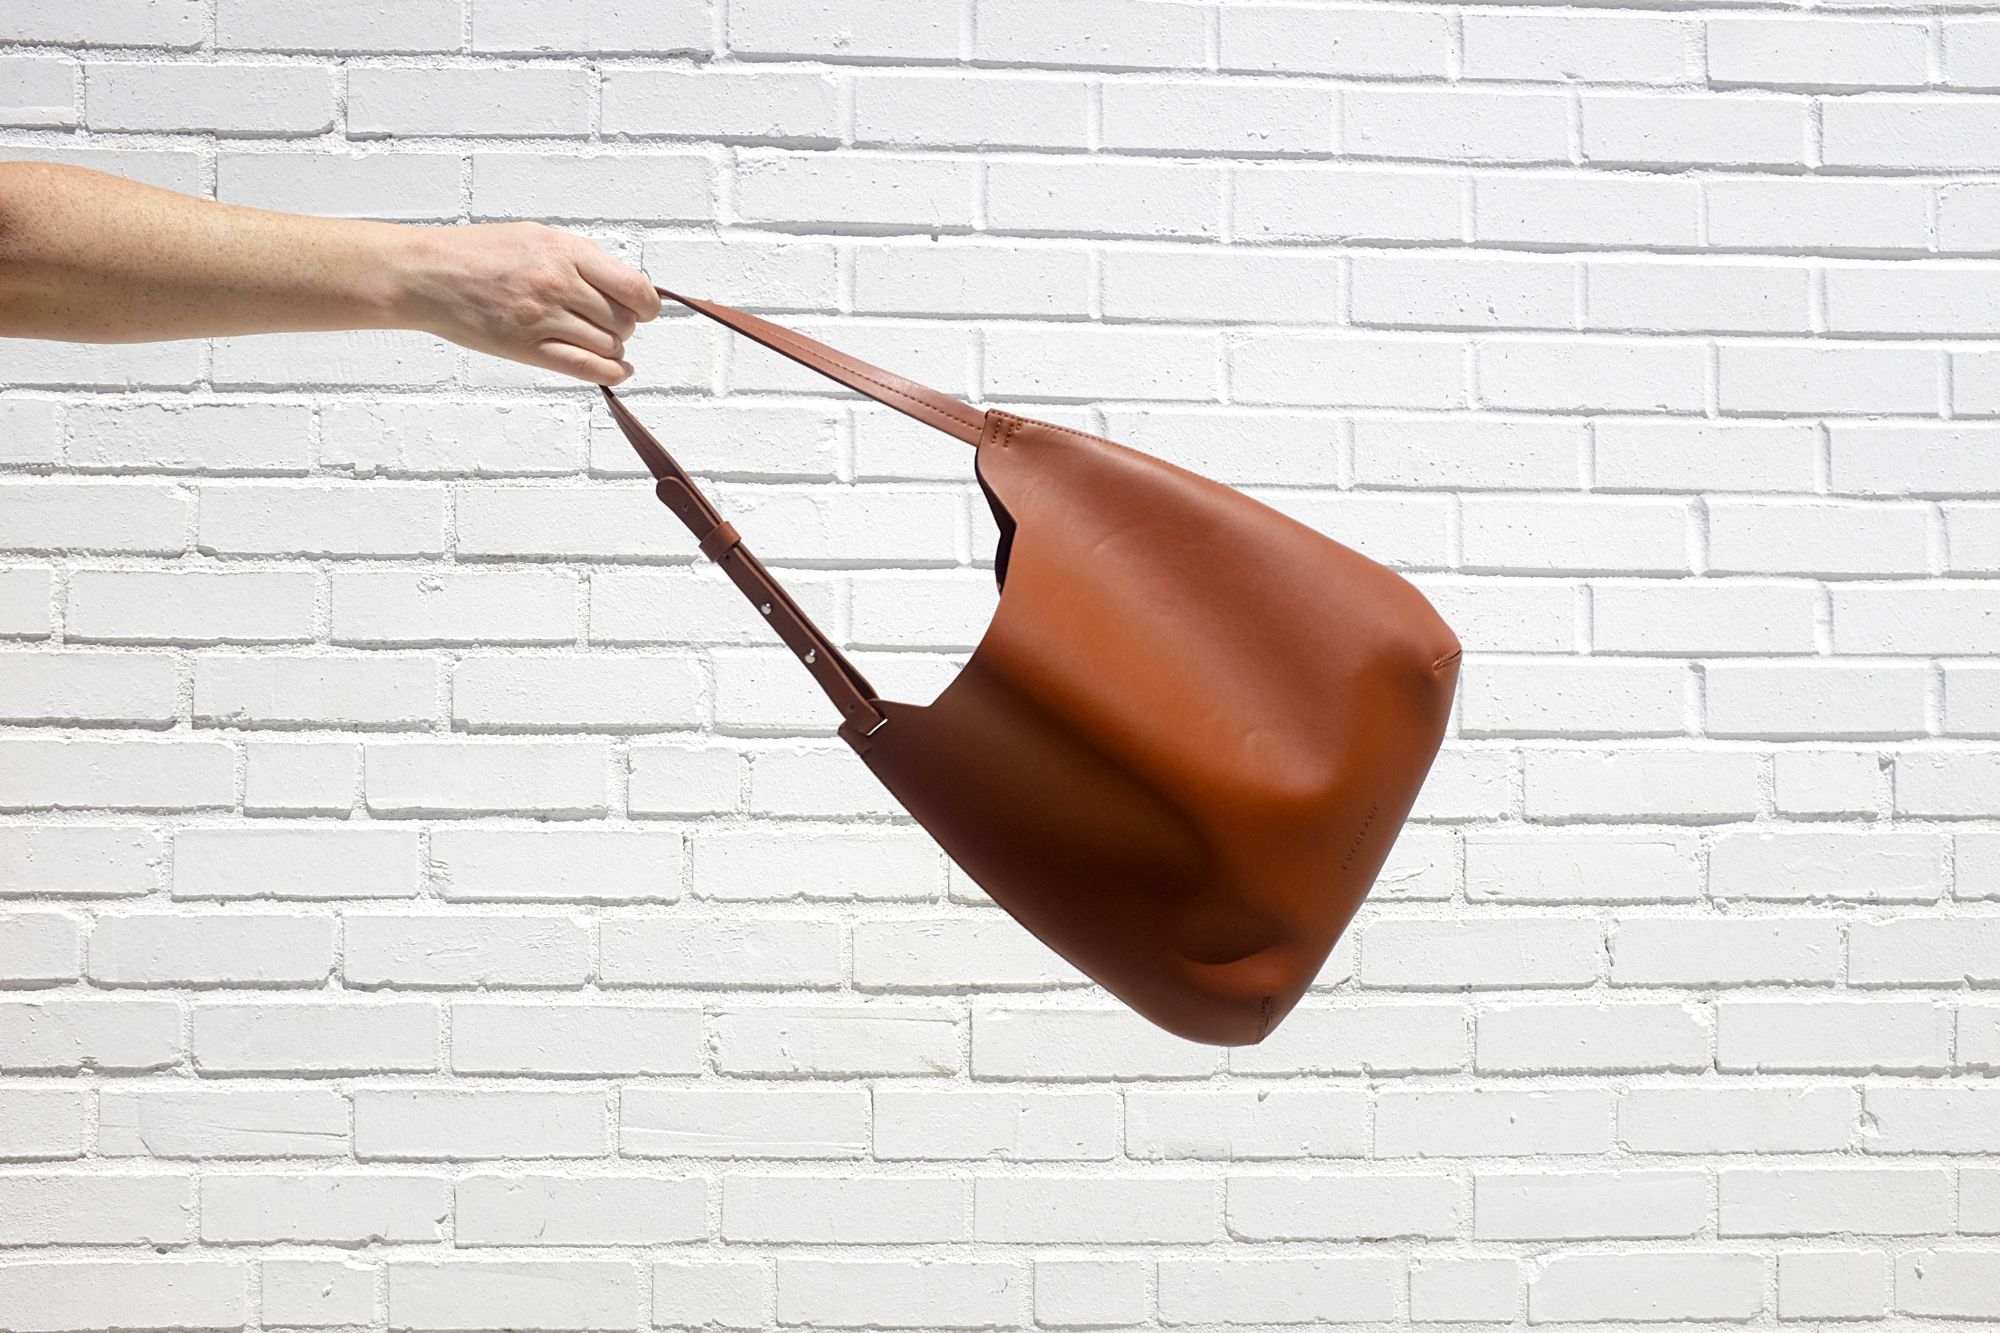 The Cactus Leather Hobo is swung in the air